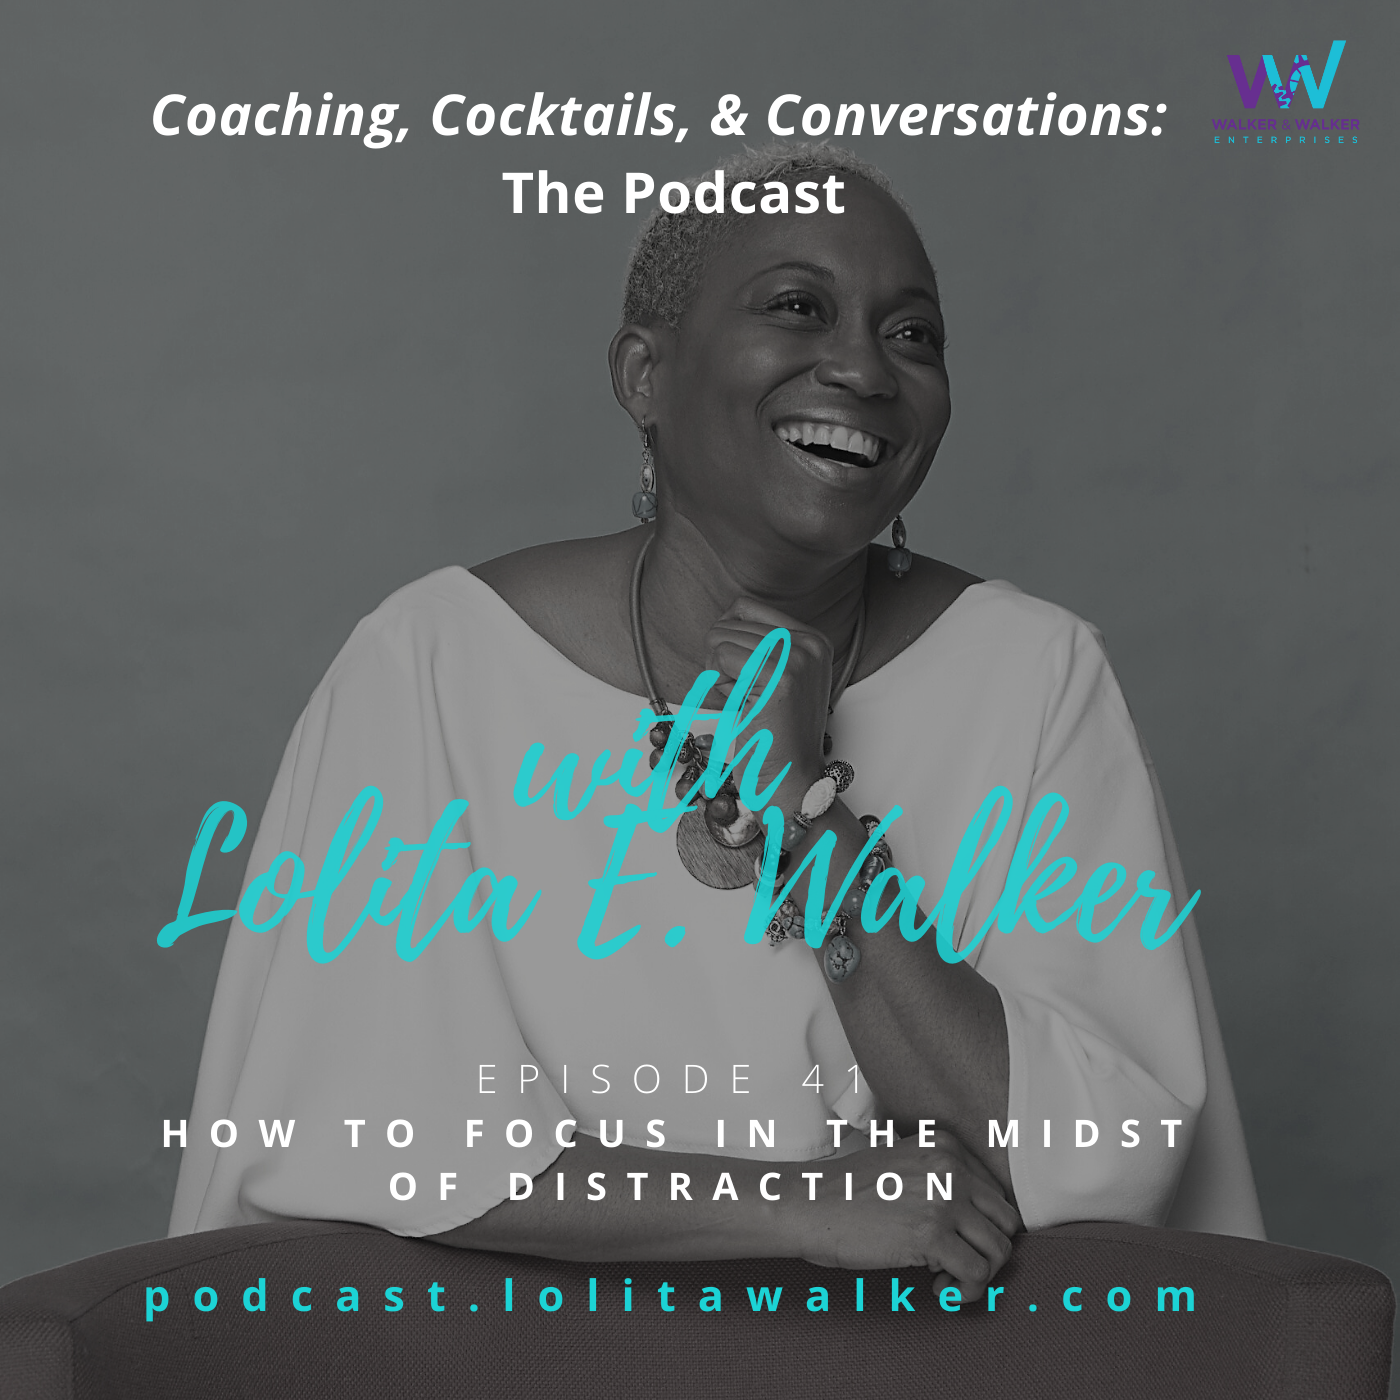 S2E41 - How to Focus in the Midst of Distraction (with Lolita E. Walker)